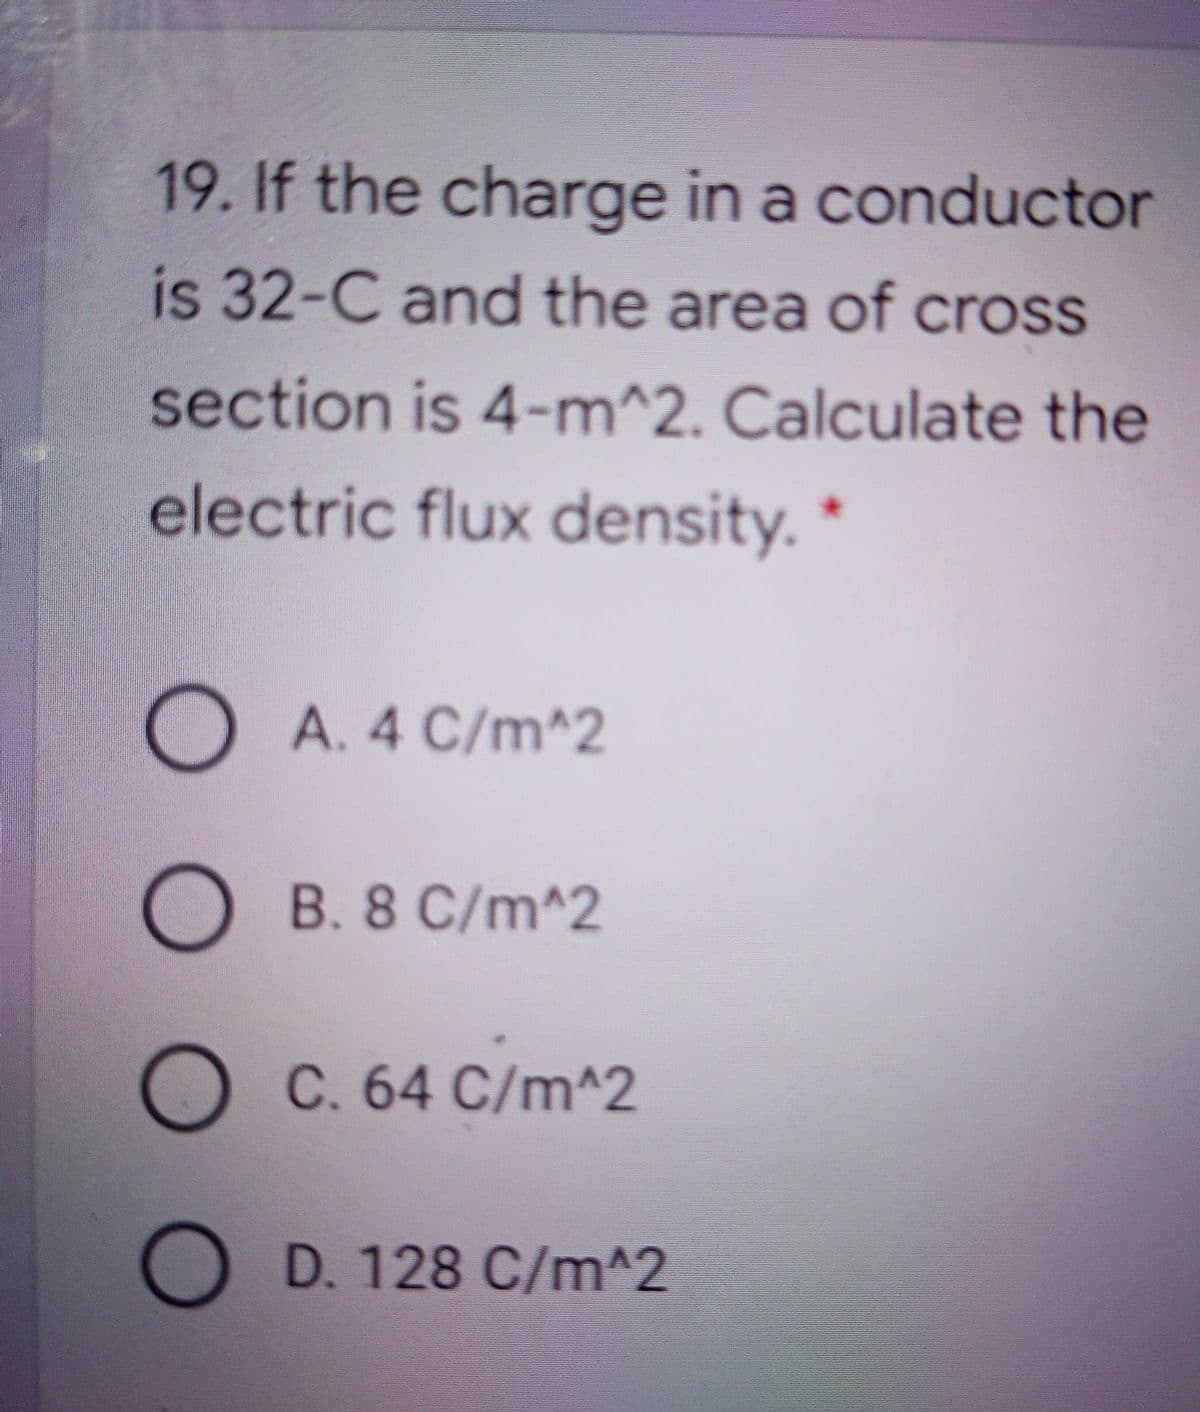 19. If the charge in a conductor
is 32-C and the area of cross
section is 4-m^2. Calculate the
electric flux density. *
A. 4 C/m^2
B. 8 C/m^2
C. 64 C/m^2
D. 128 C/m^2
